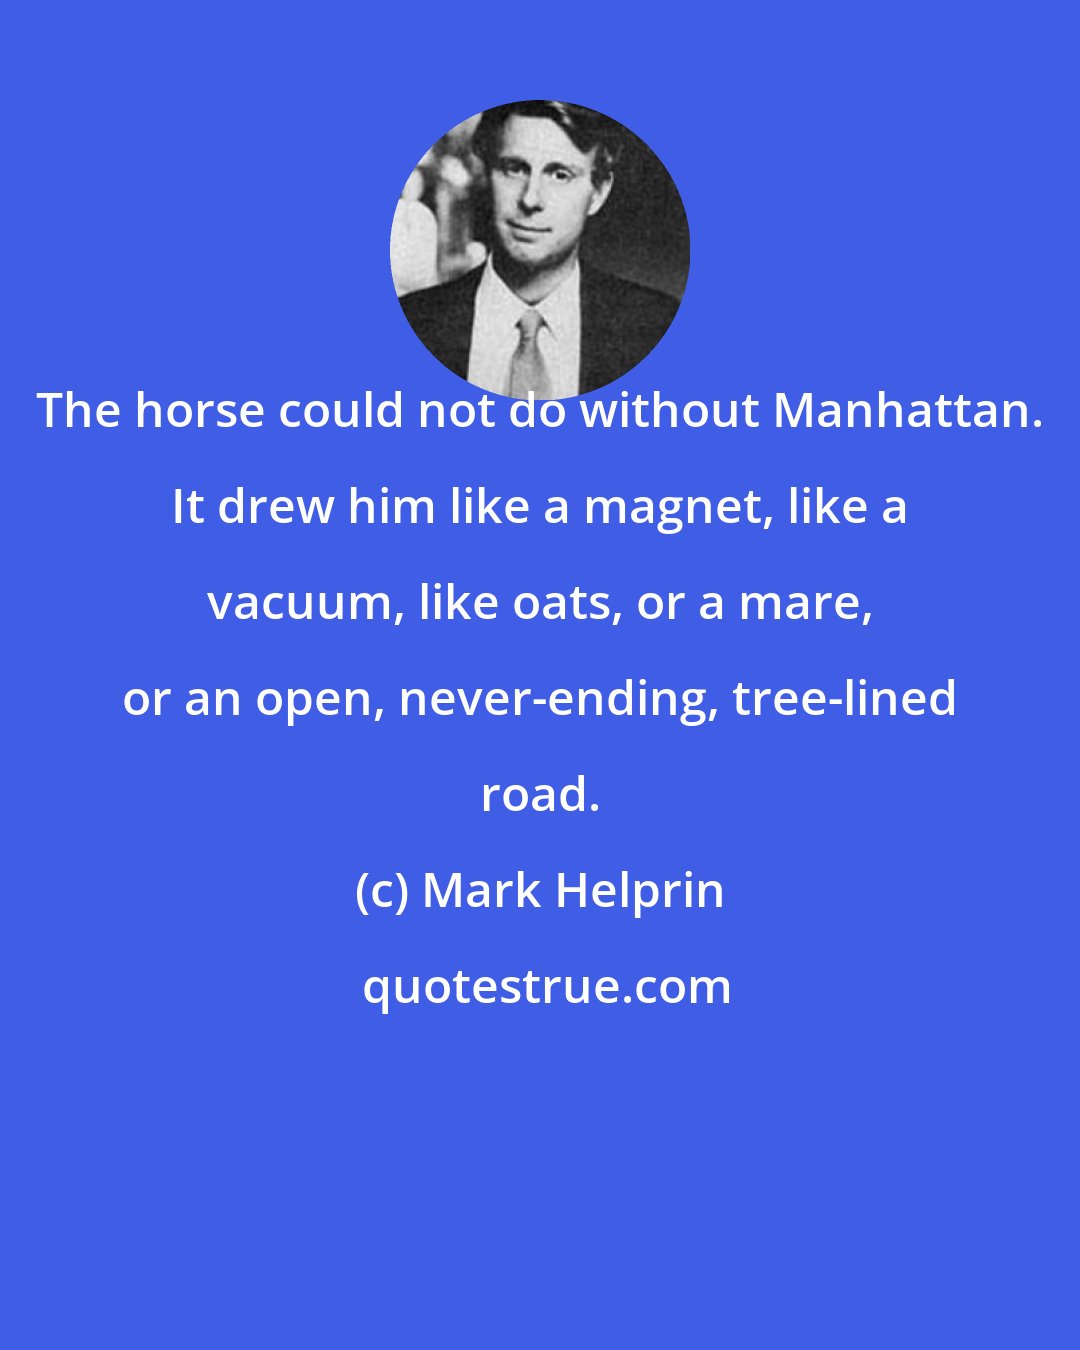 Mark Helprin: The horse could not do without Manhattan. It drew him like a magnet, like a vacuum, like oats, or a mare, or an open, never-ending, tree-lined road.